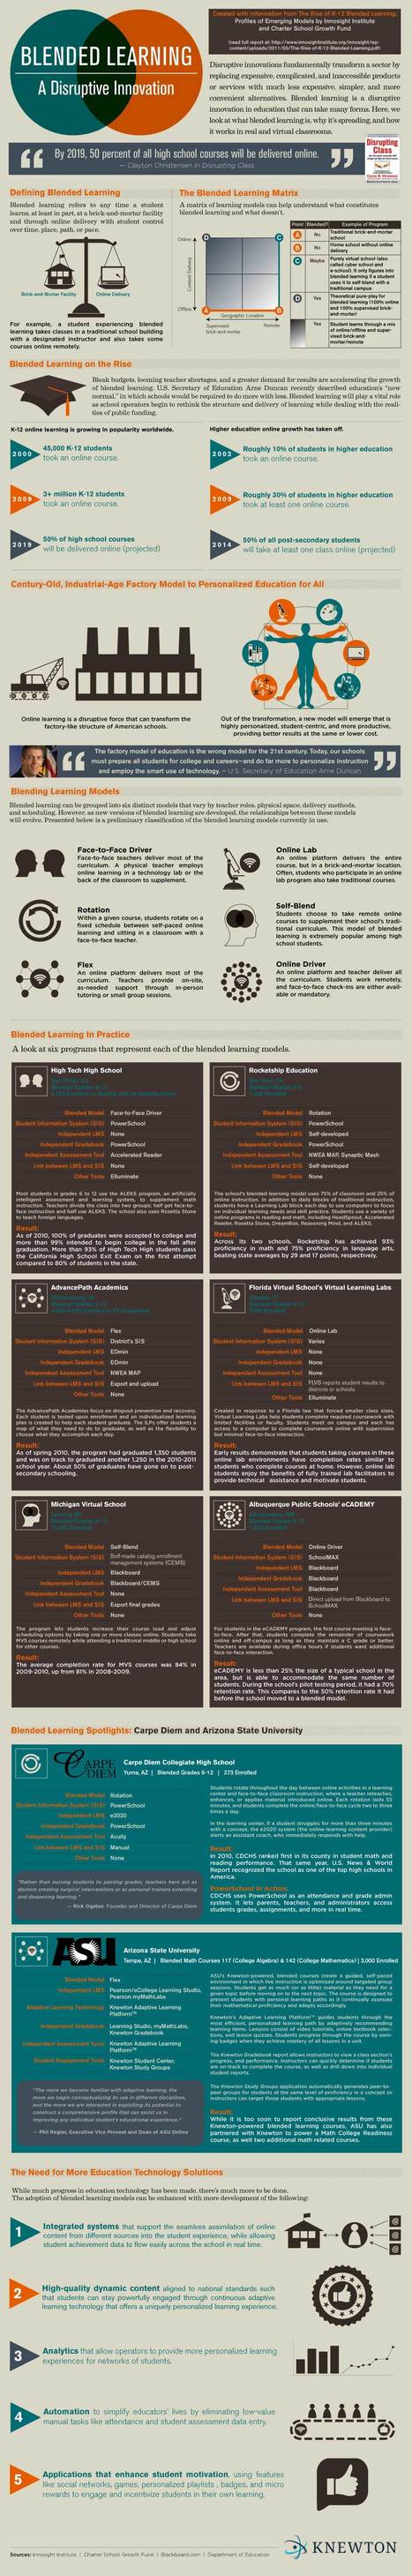 Is it a "Disruptive" Innovation?  6 Types of Blended Learning #Infographic | Disruptive Education and Clayton Christensen | Scoop.it